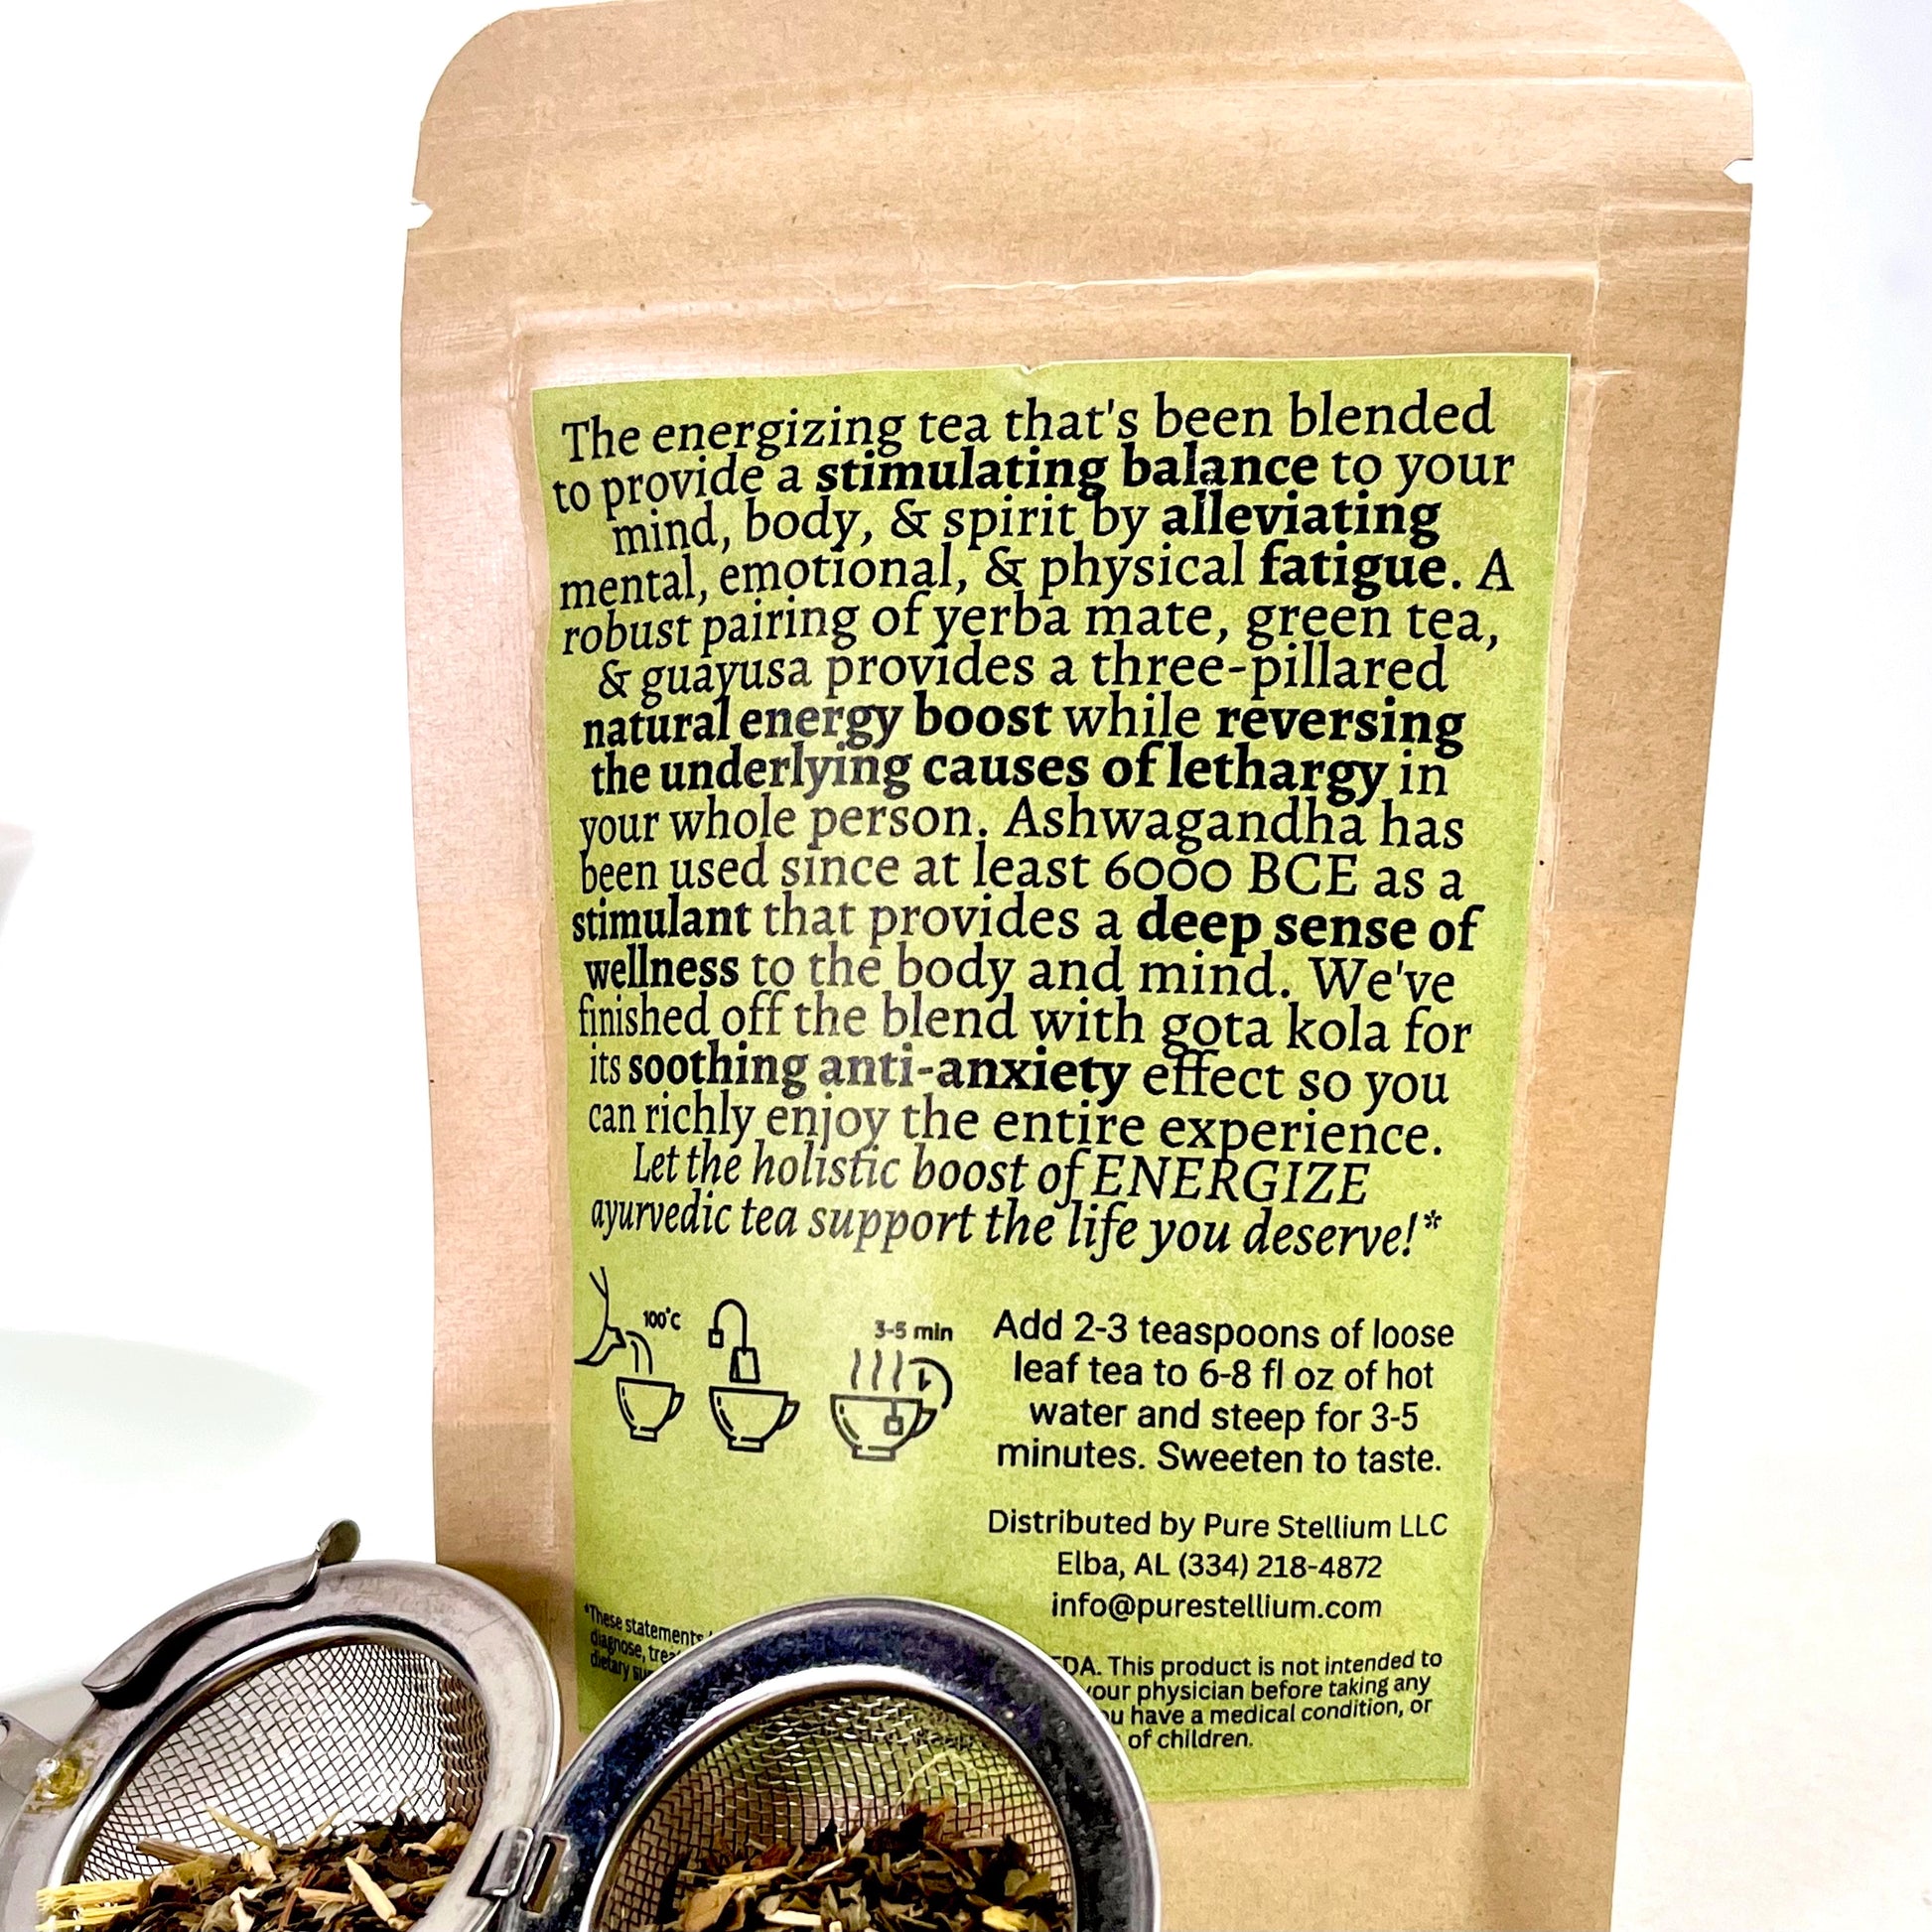 The package of Elemental Life Product's Energize loose leaf tea blend with raw ingredients in an open tea ball